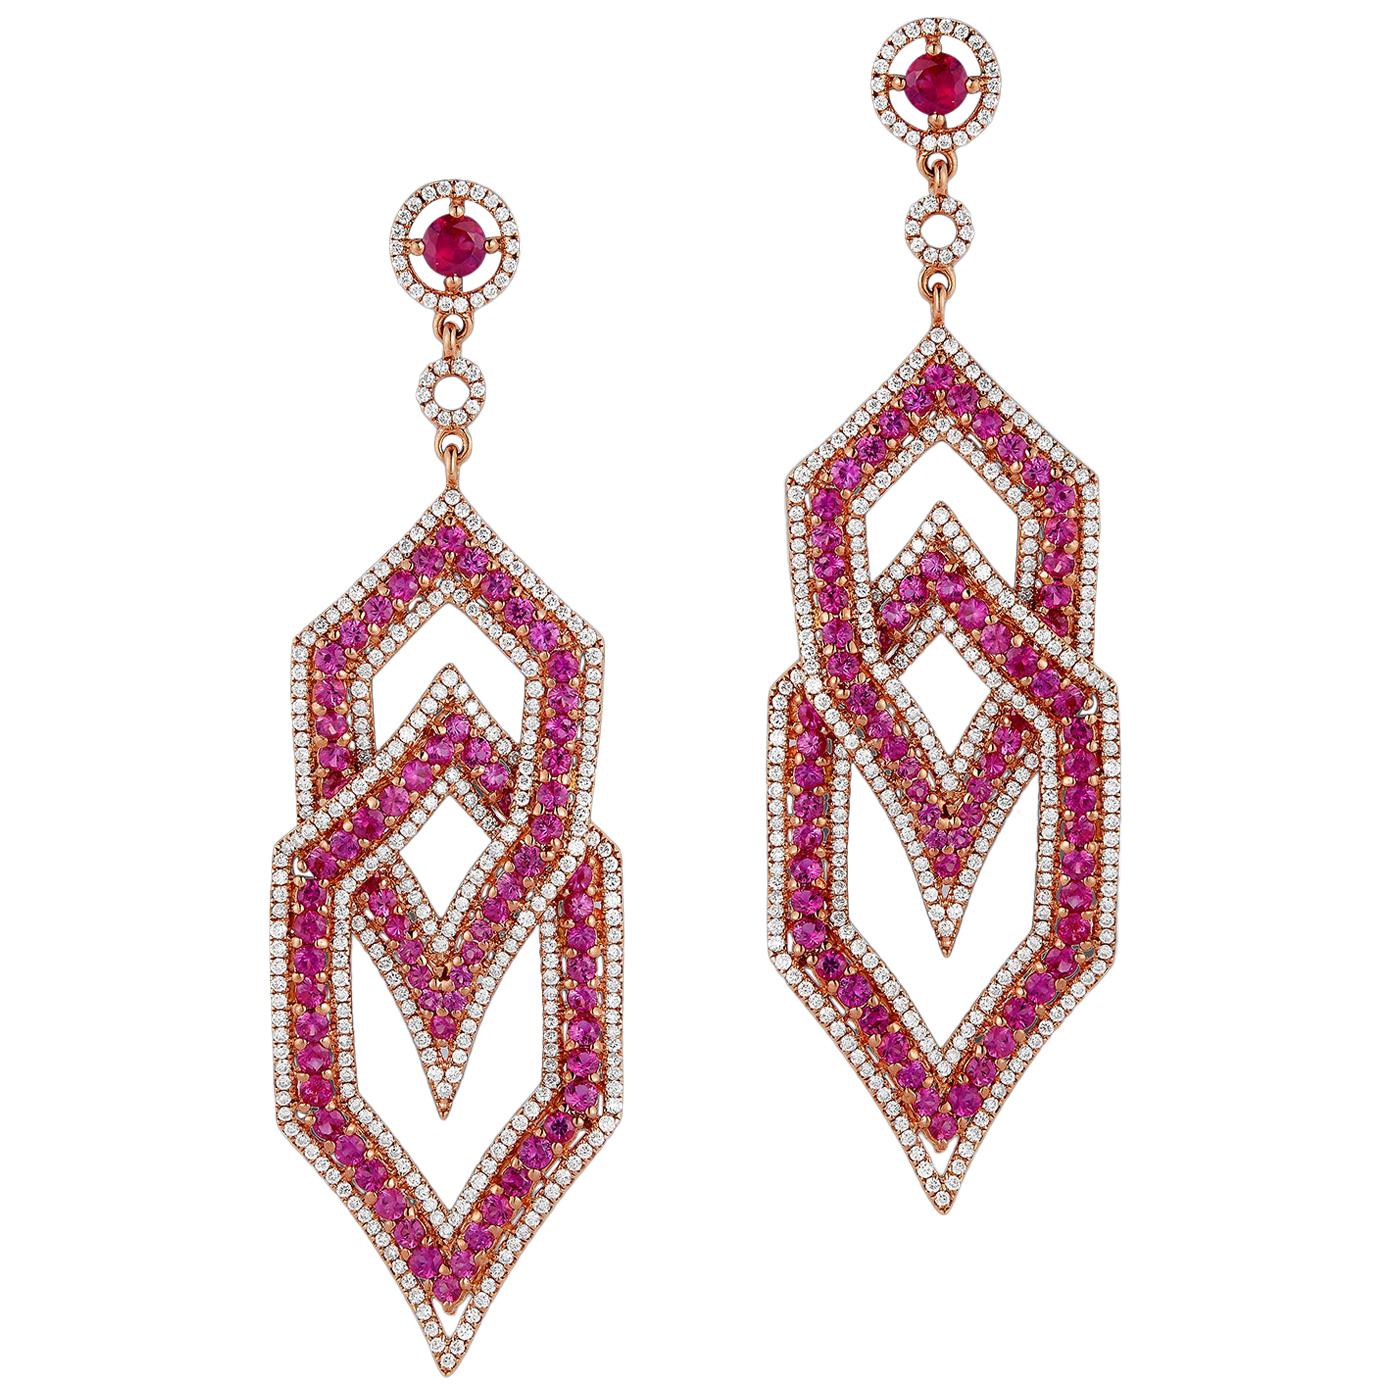 18K Gold Diamond, Ruby and Red Sapphire Earrings, Total weight stones 8.68 Carat